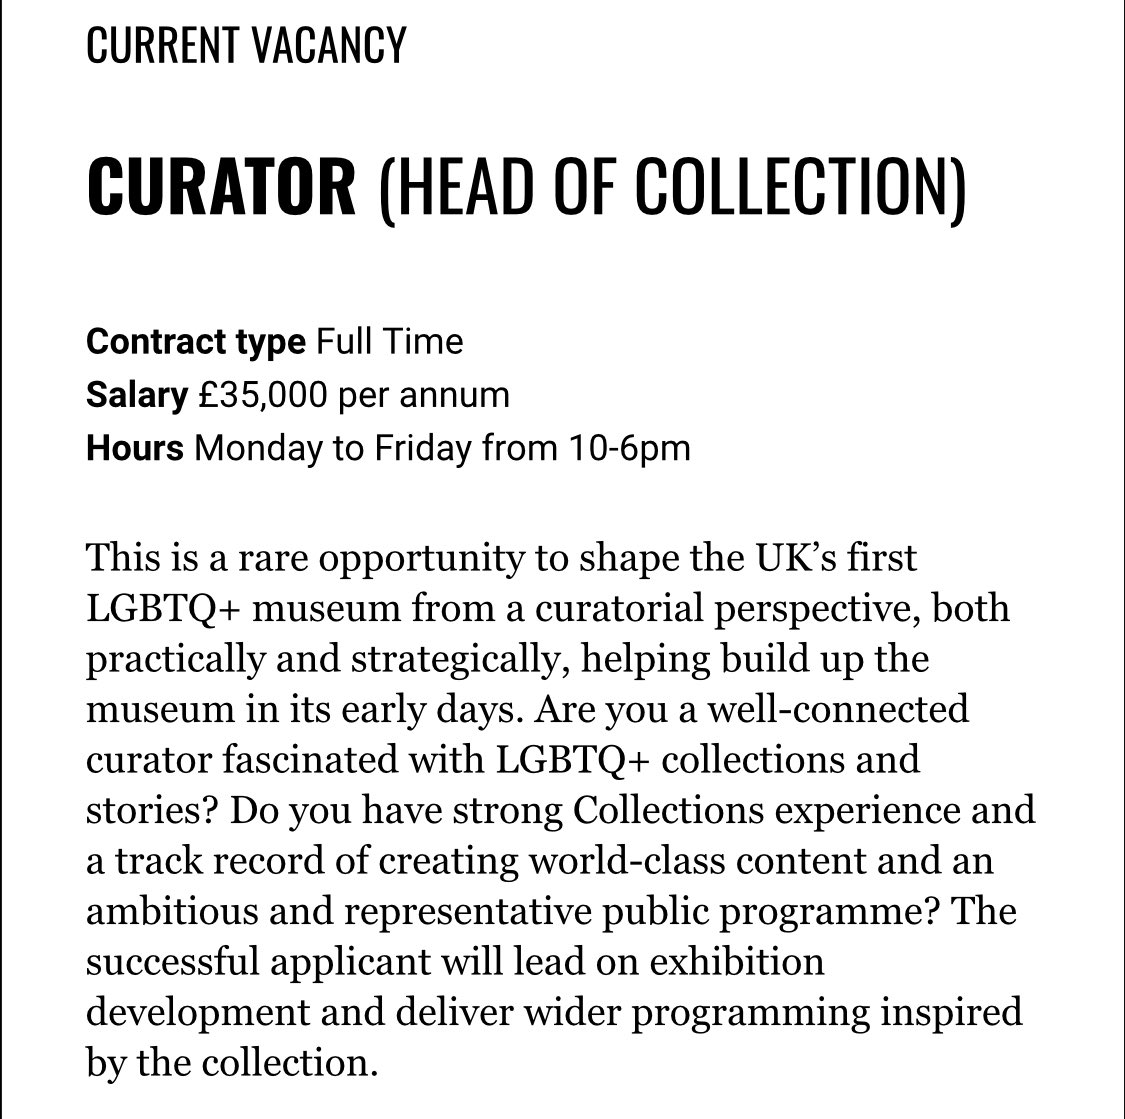 JOB VACANCY! Come work with me and others at @QueerBritain amazing museum makers who are doing important work to record and celebrate queer history. You’ll play a vital role - a rare opportunity to shape the UK’s first LGBTQ+ museum as Head of Collections queerbritain.org.uk/join-us